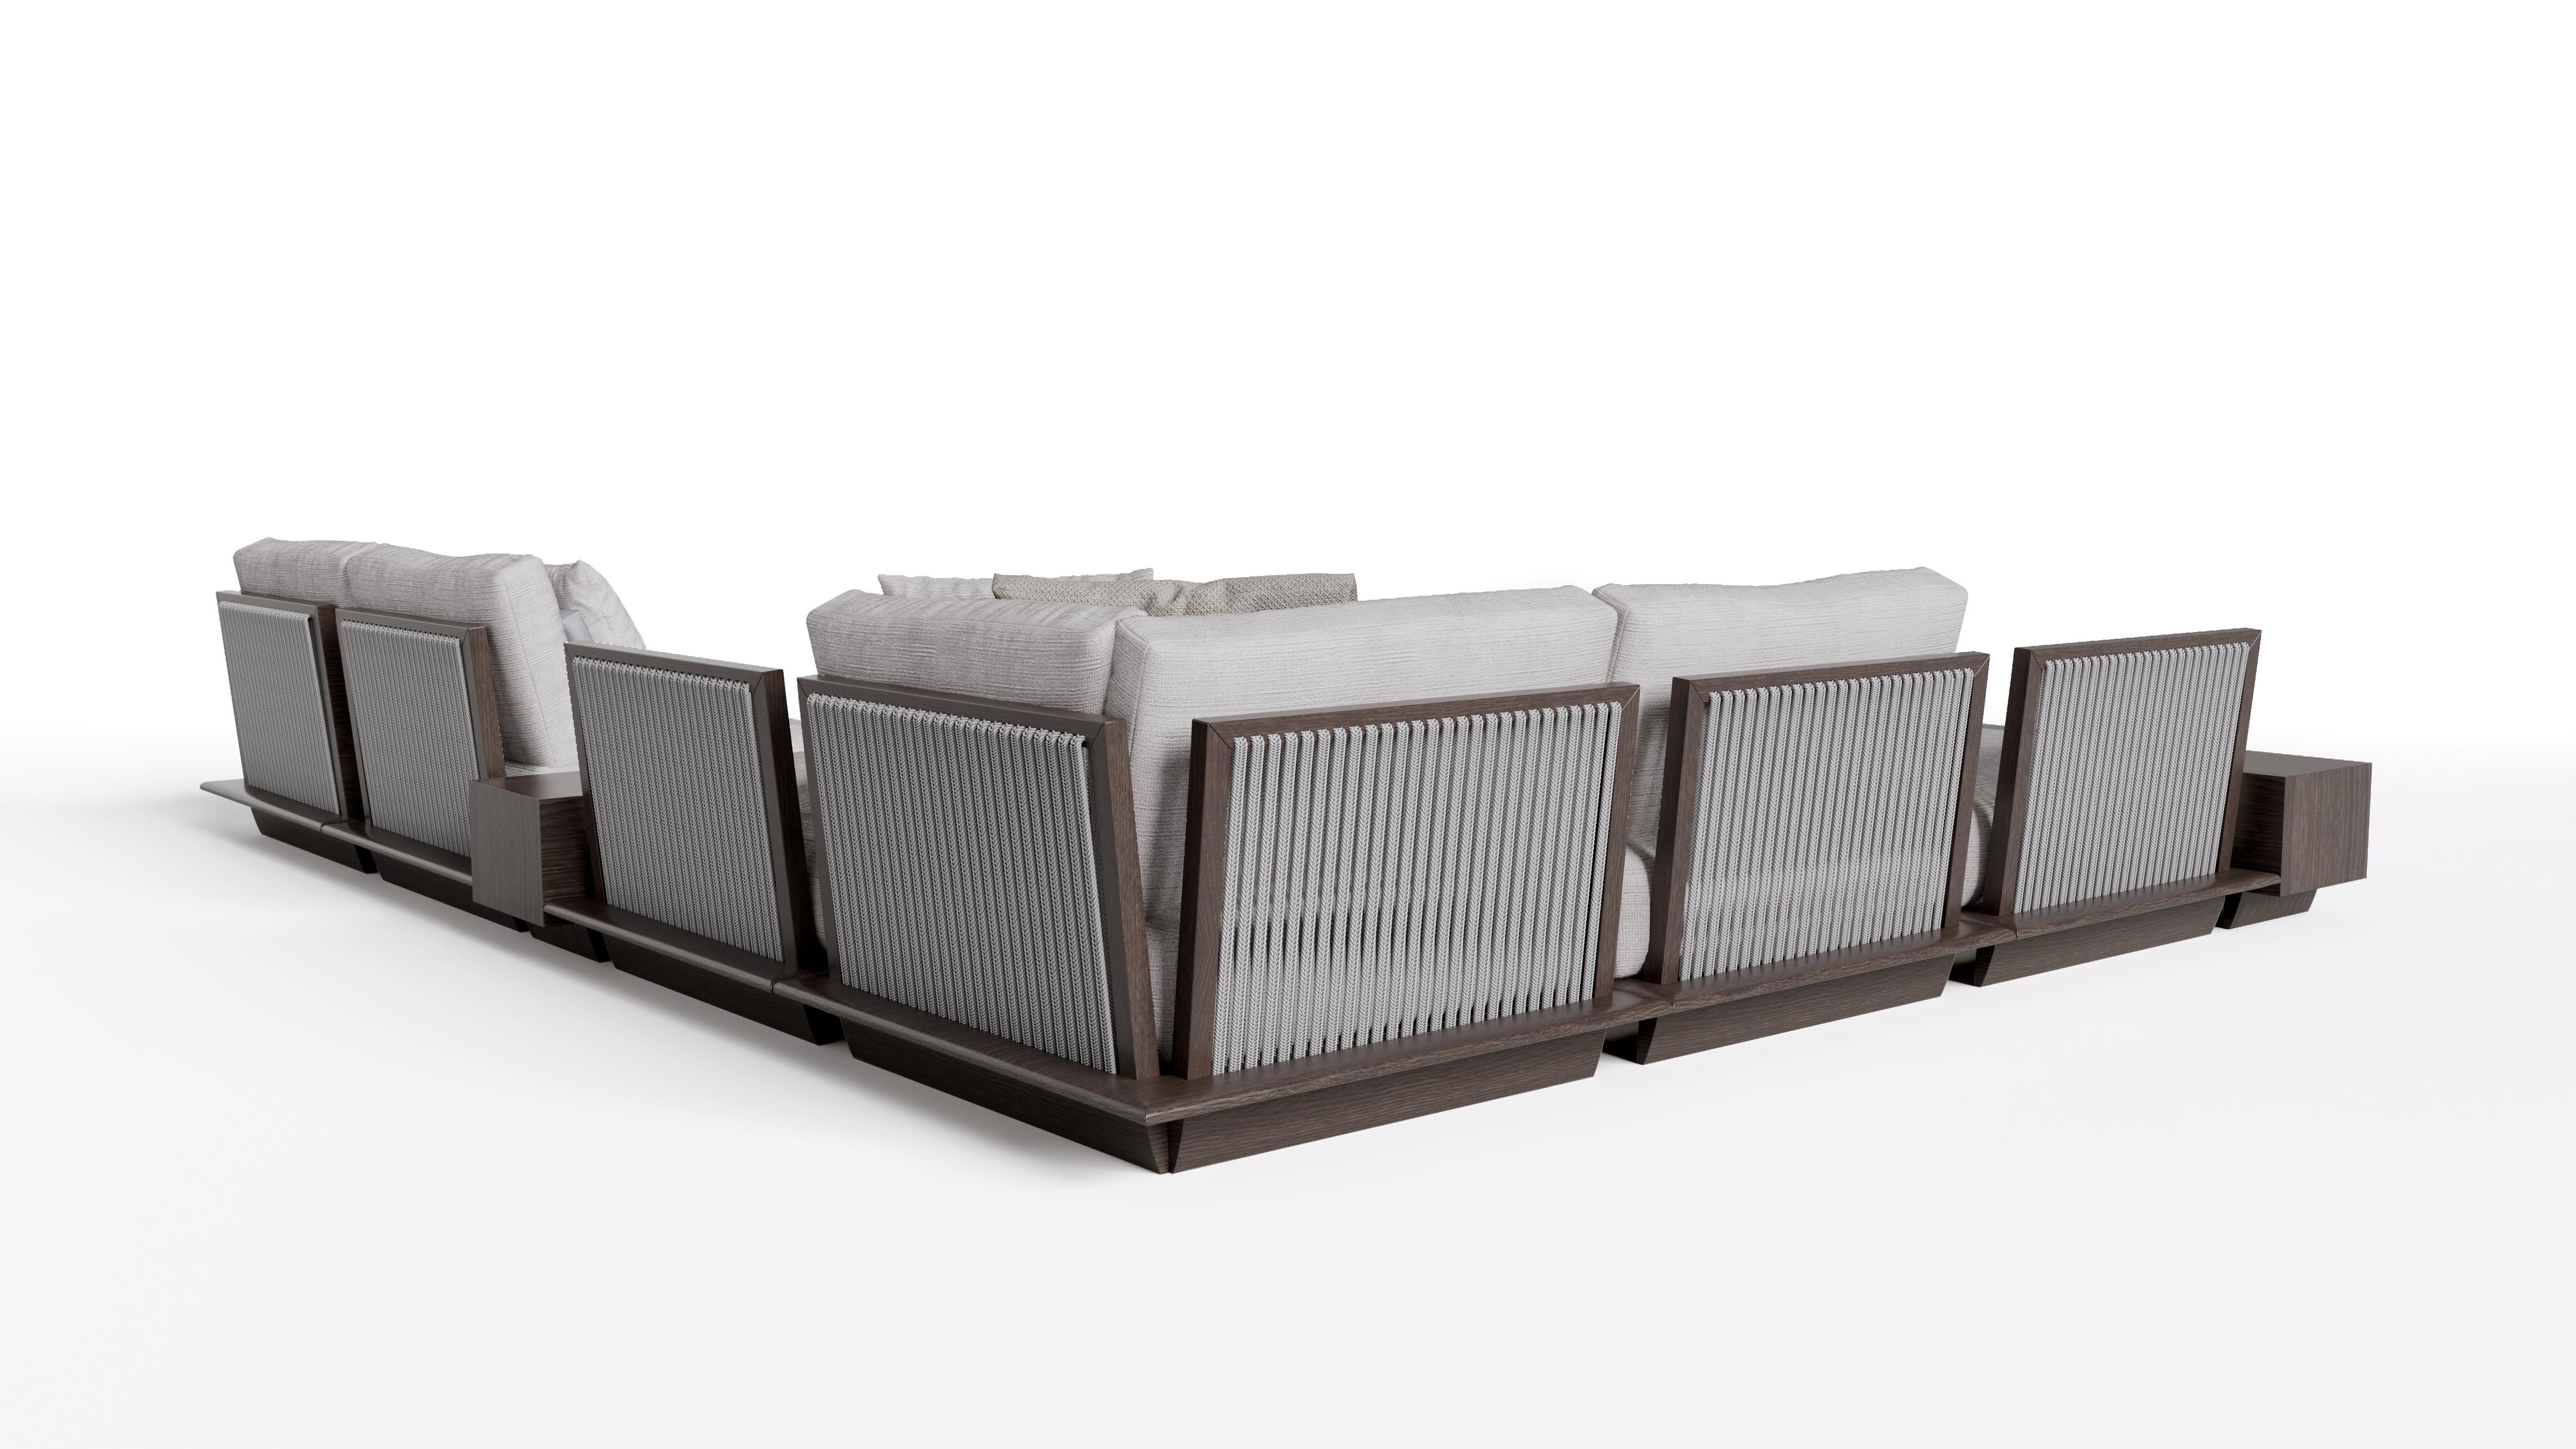 Modular Sectional for outdoor use made by Coco Wolf in London.
Completely handmade product and may configurations available.
A sculptural work of art that functions as a contemporary sofa. The details of this piece boast
skillful craftsmanship by